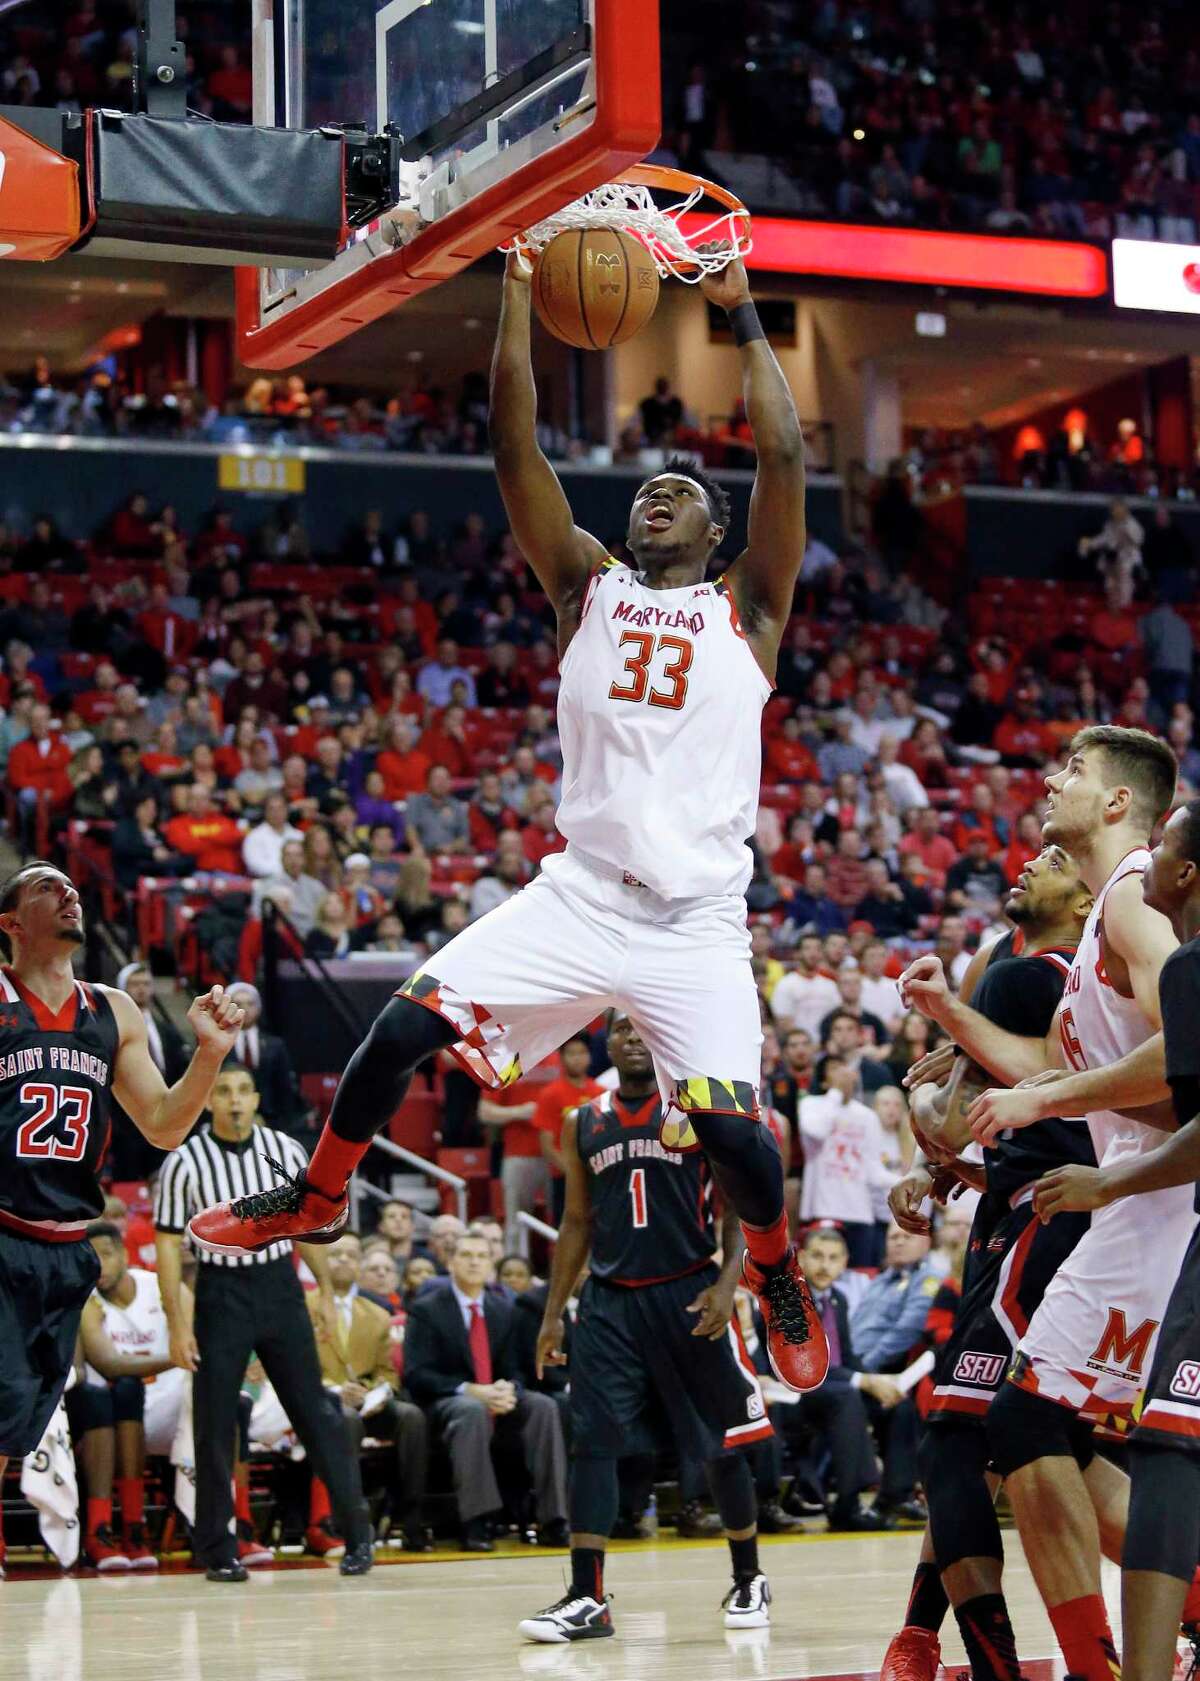 Maryland center Diamond Stone (33) dunks the ball during a game against St. Francis earlier this season.